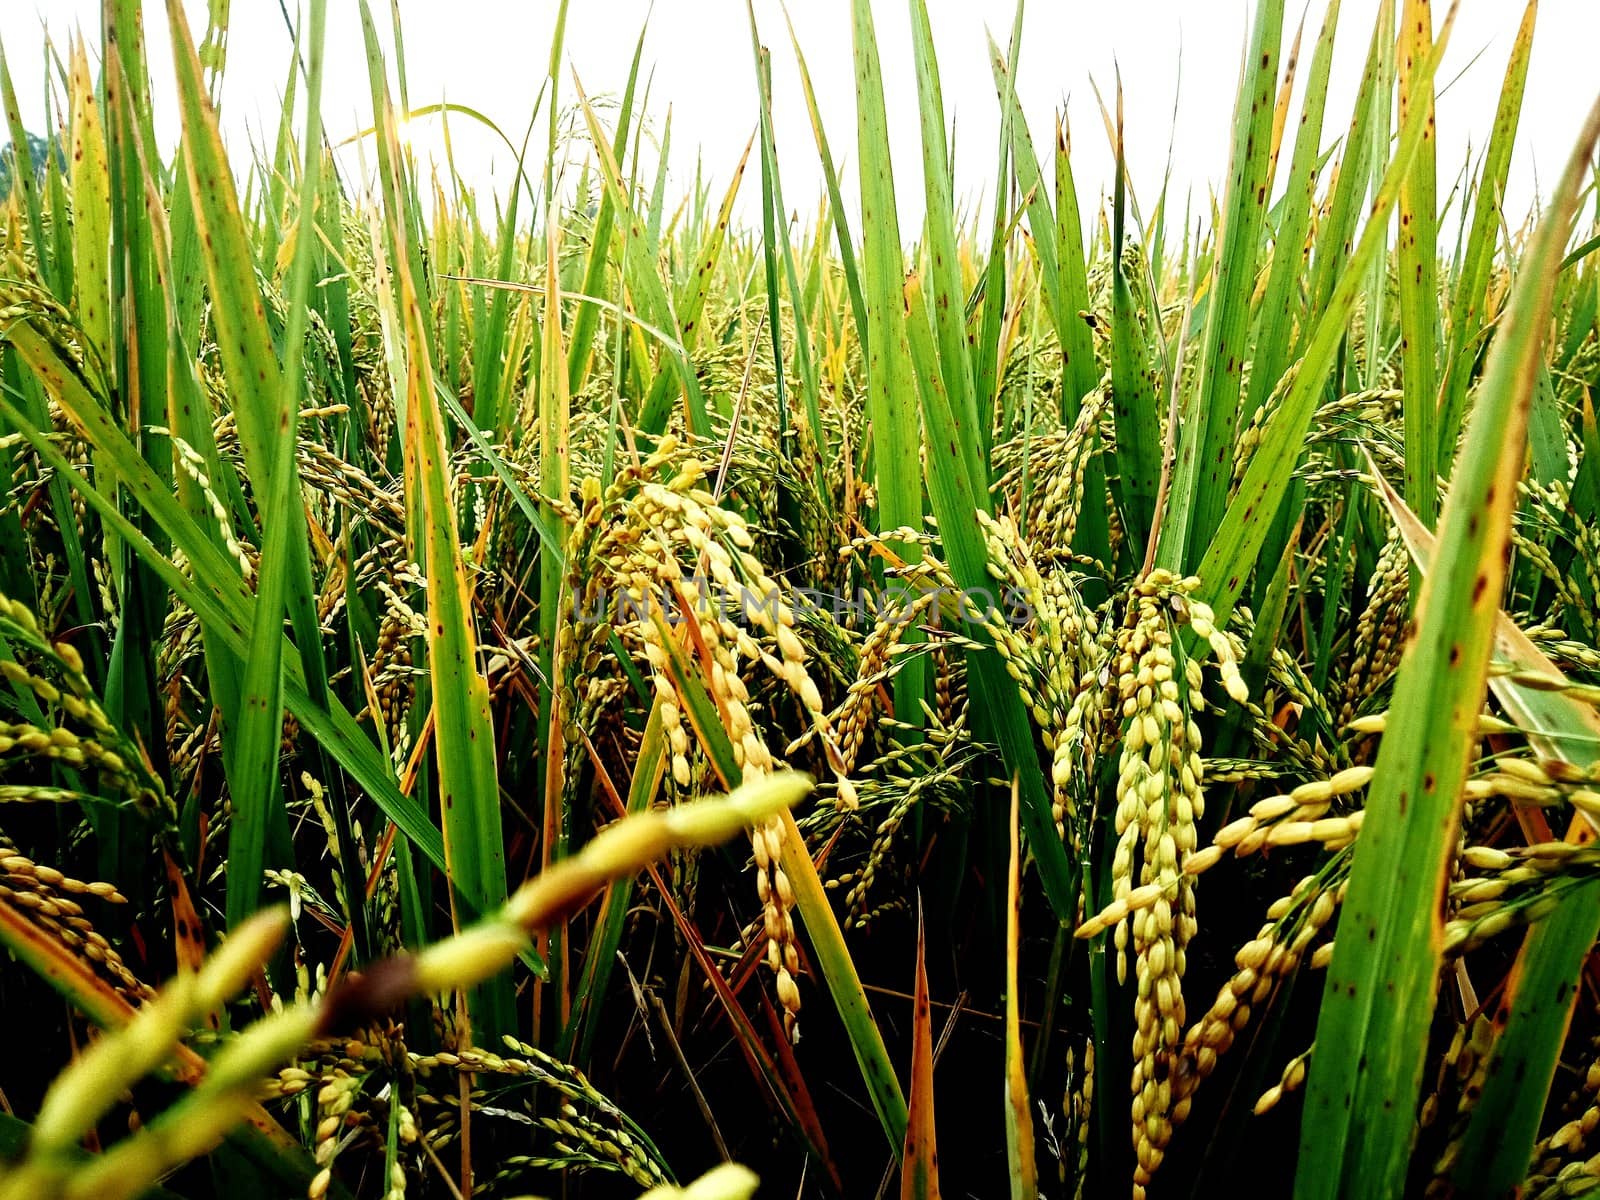 Cultivation of Paddy - Agriculture